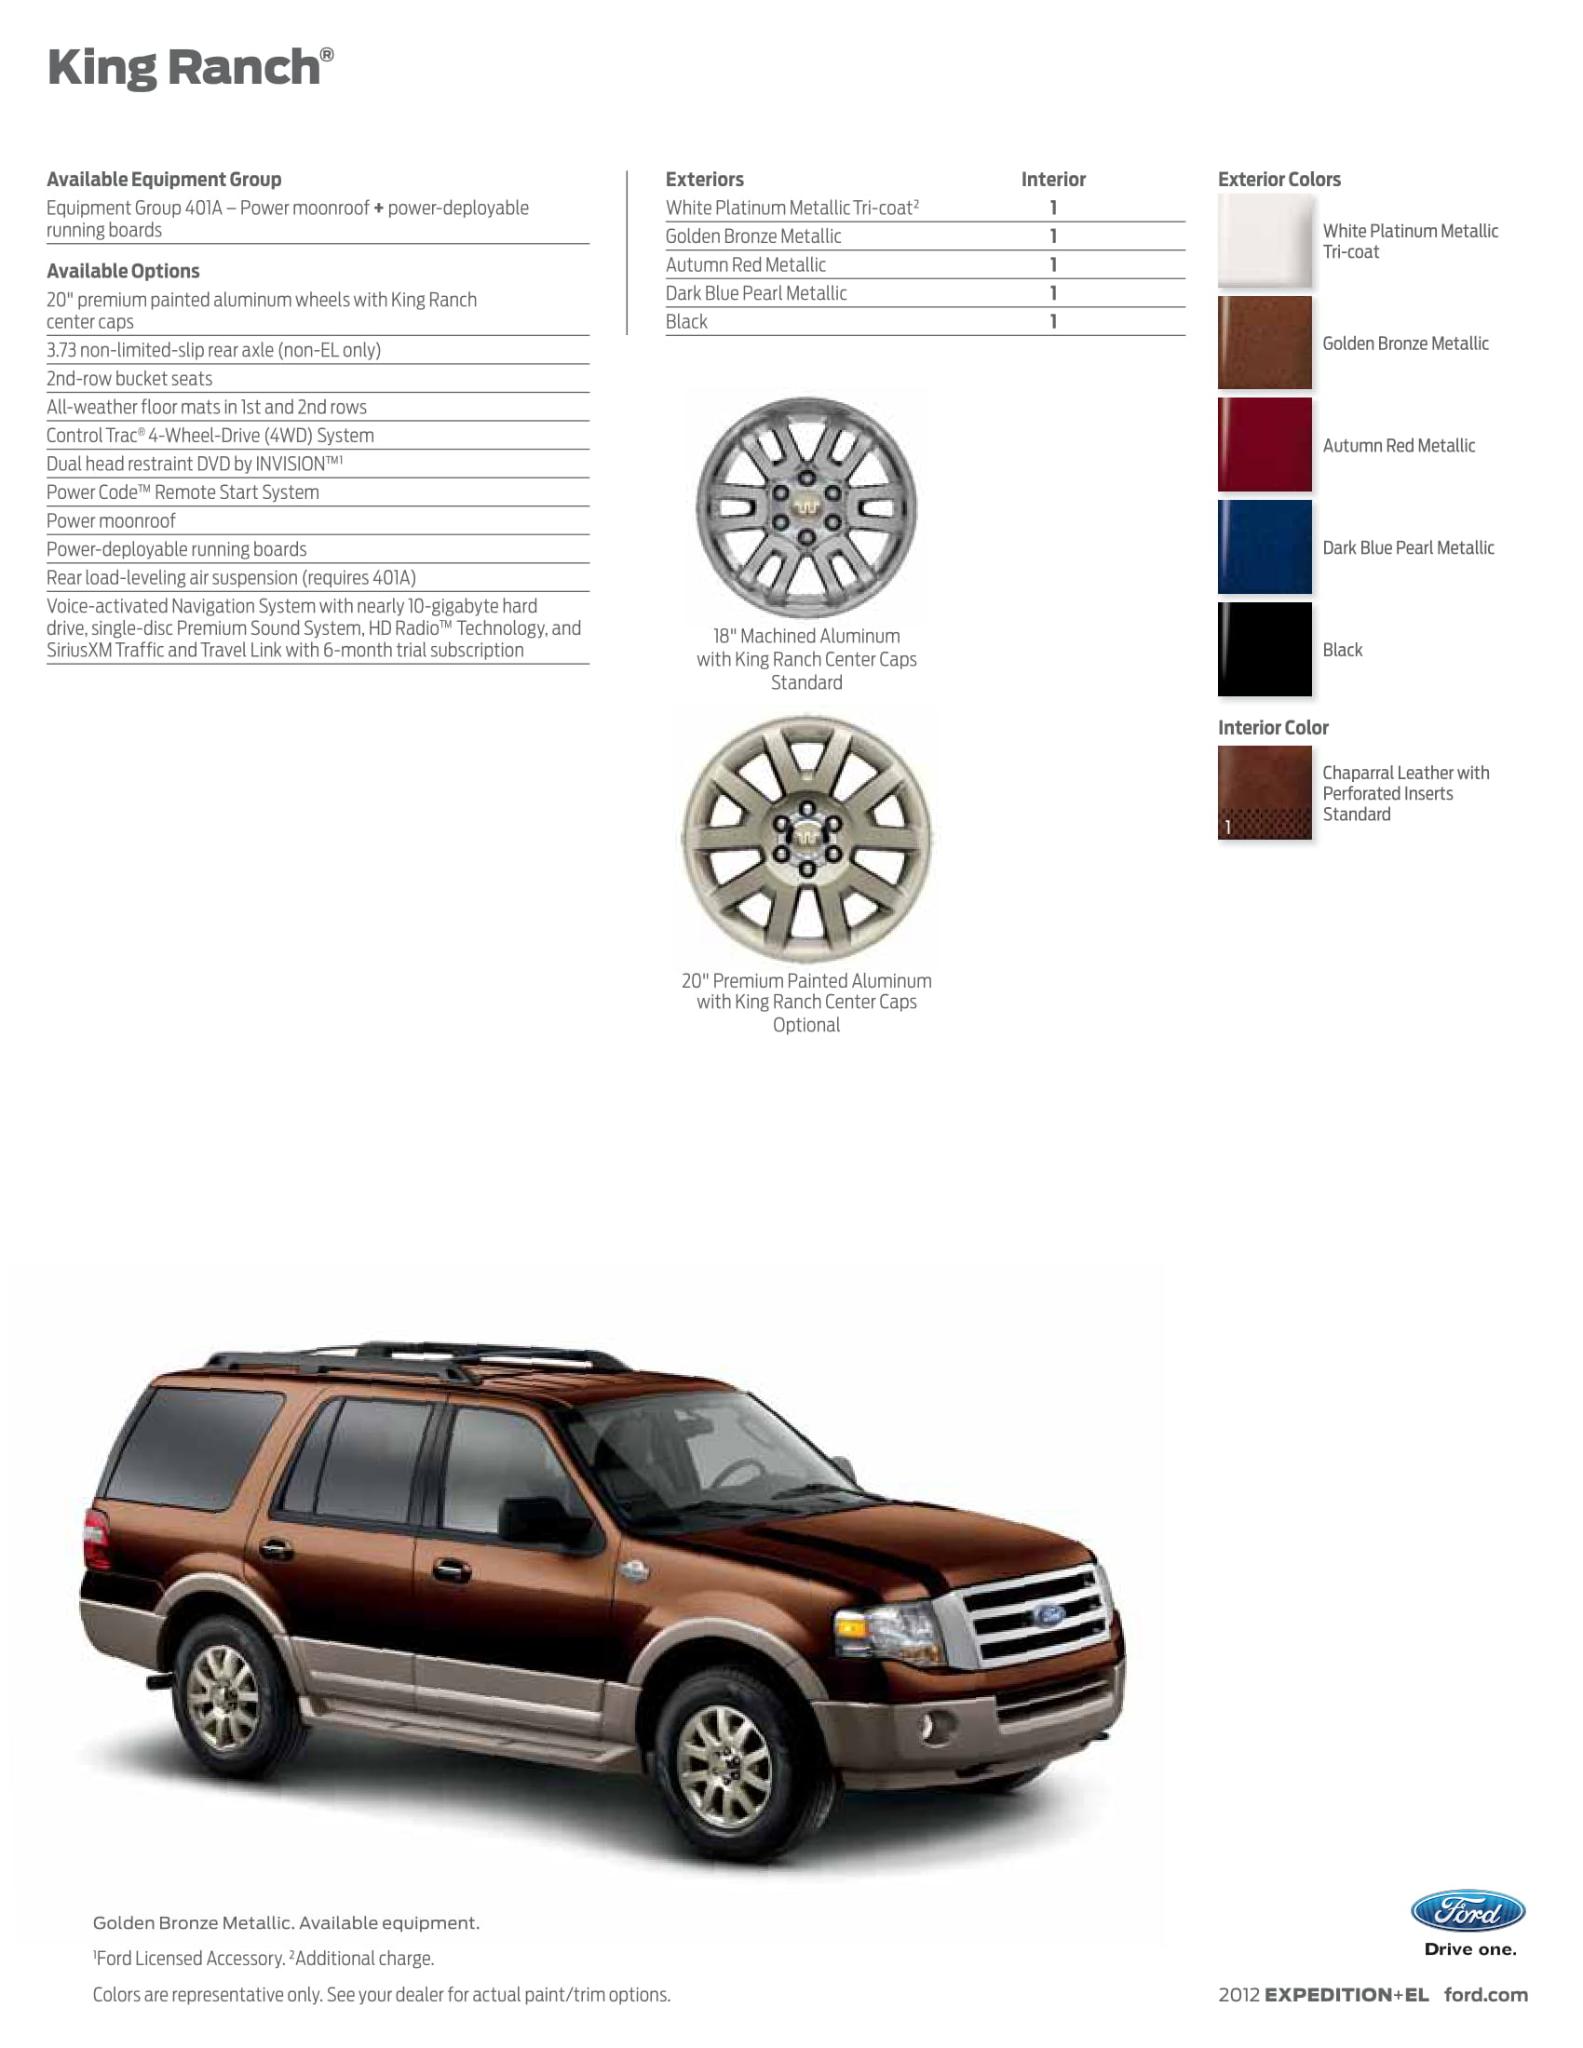 2004 ford excursion paint codes